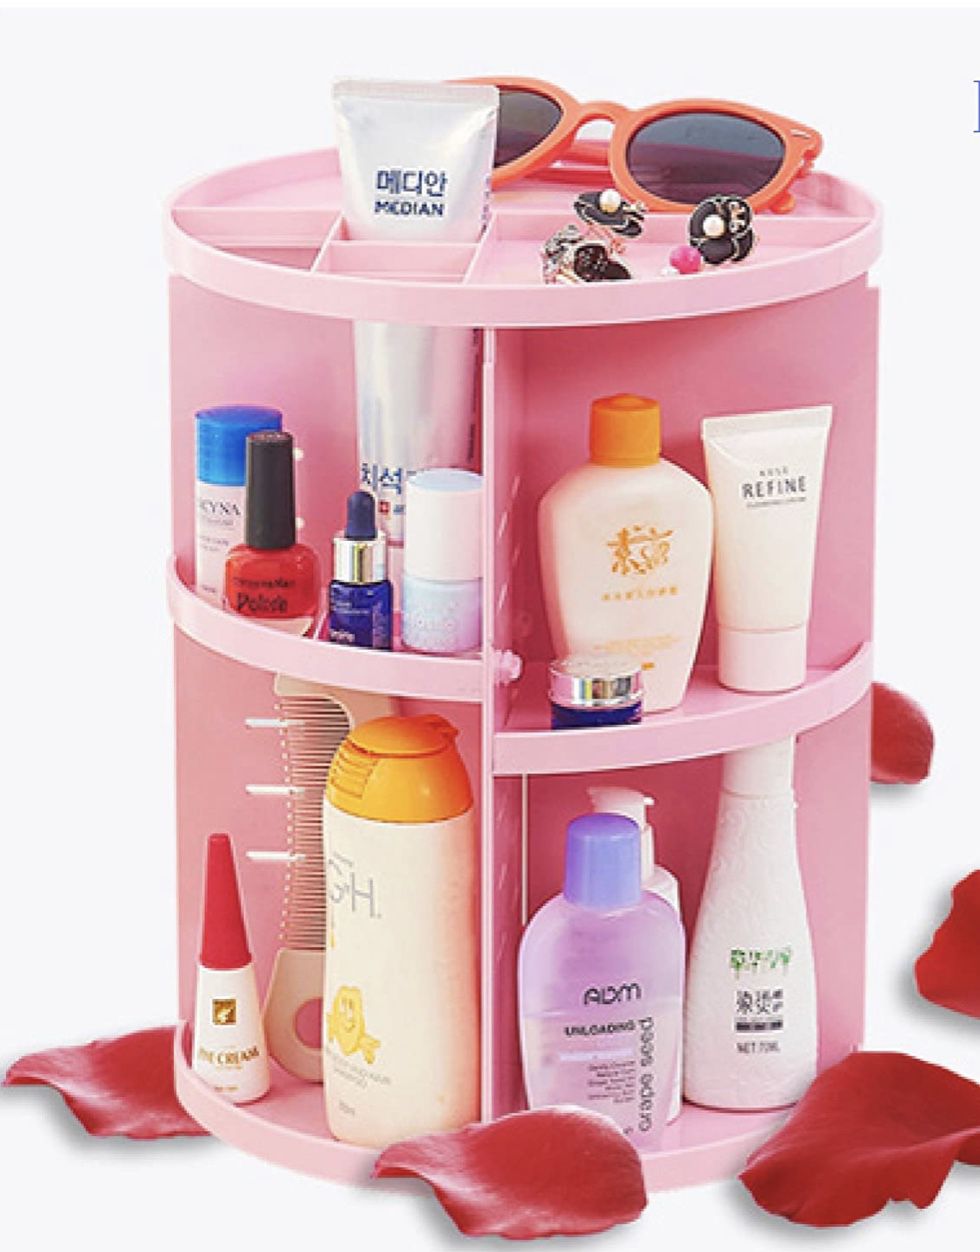 Rotating Organizer Adjustable Makeup and Desk Accessories Storage Holder with Large Capacity, Makes Your Table Cle